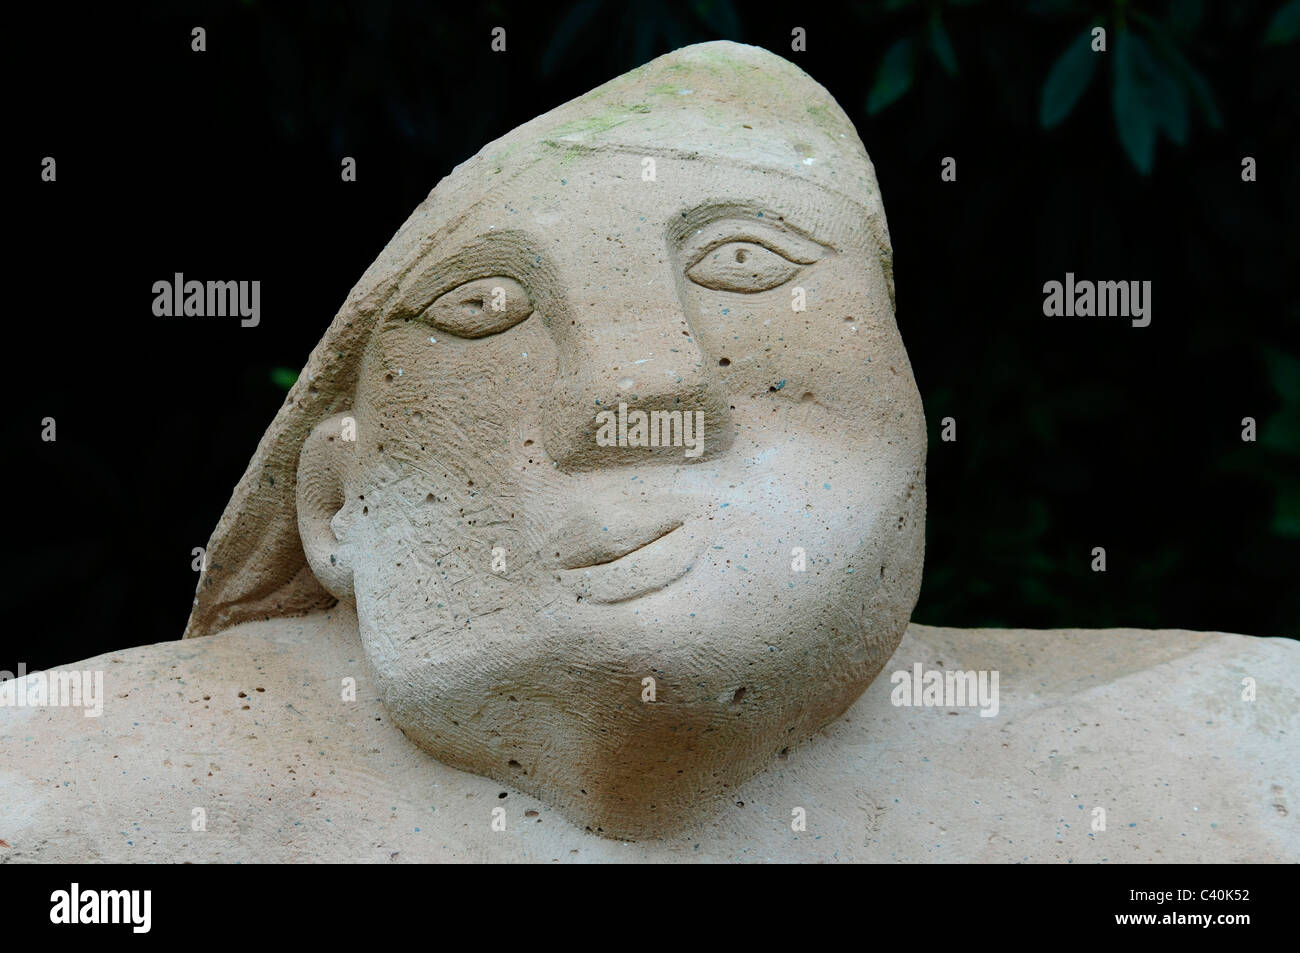 glyn wyder welsh wales sculpture stone head face art artistic Stock Photo